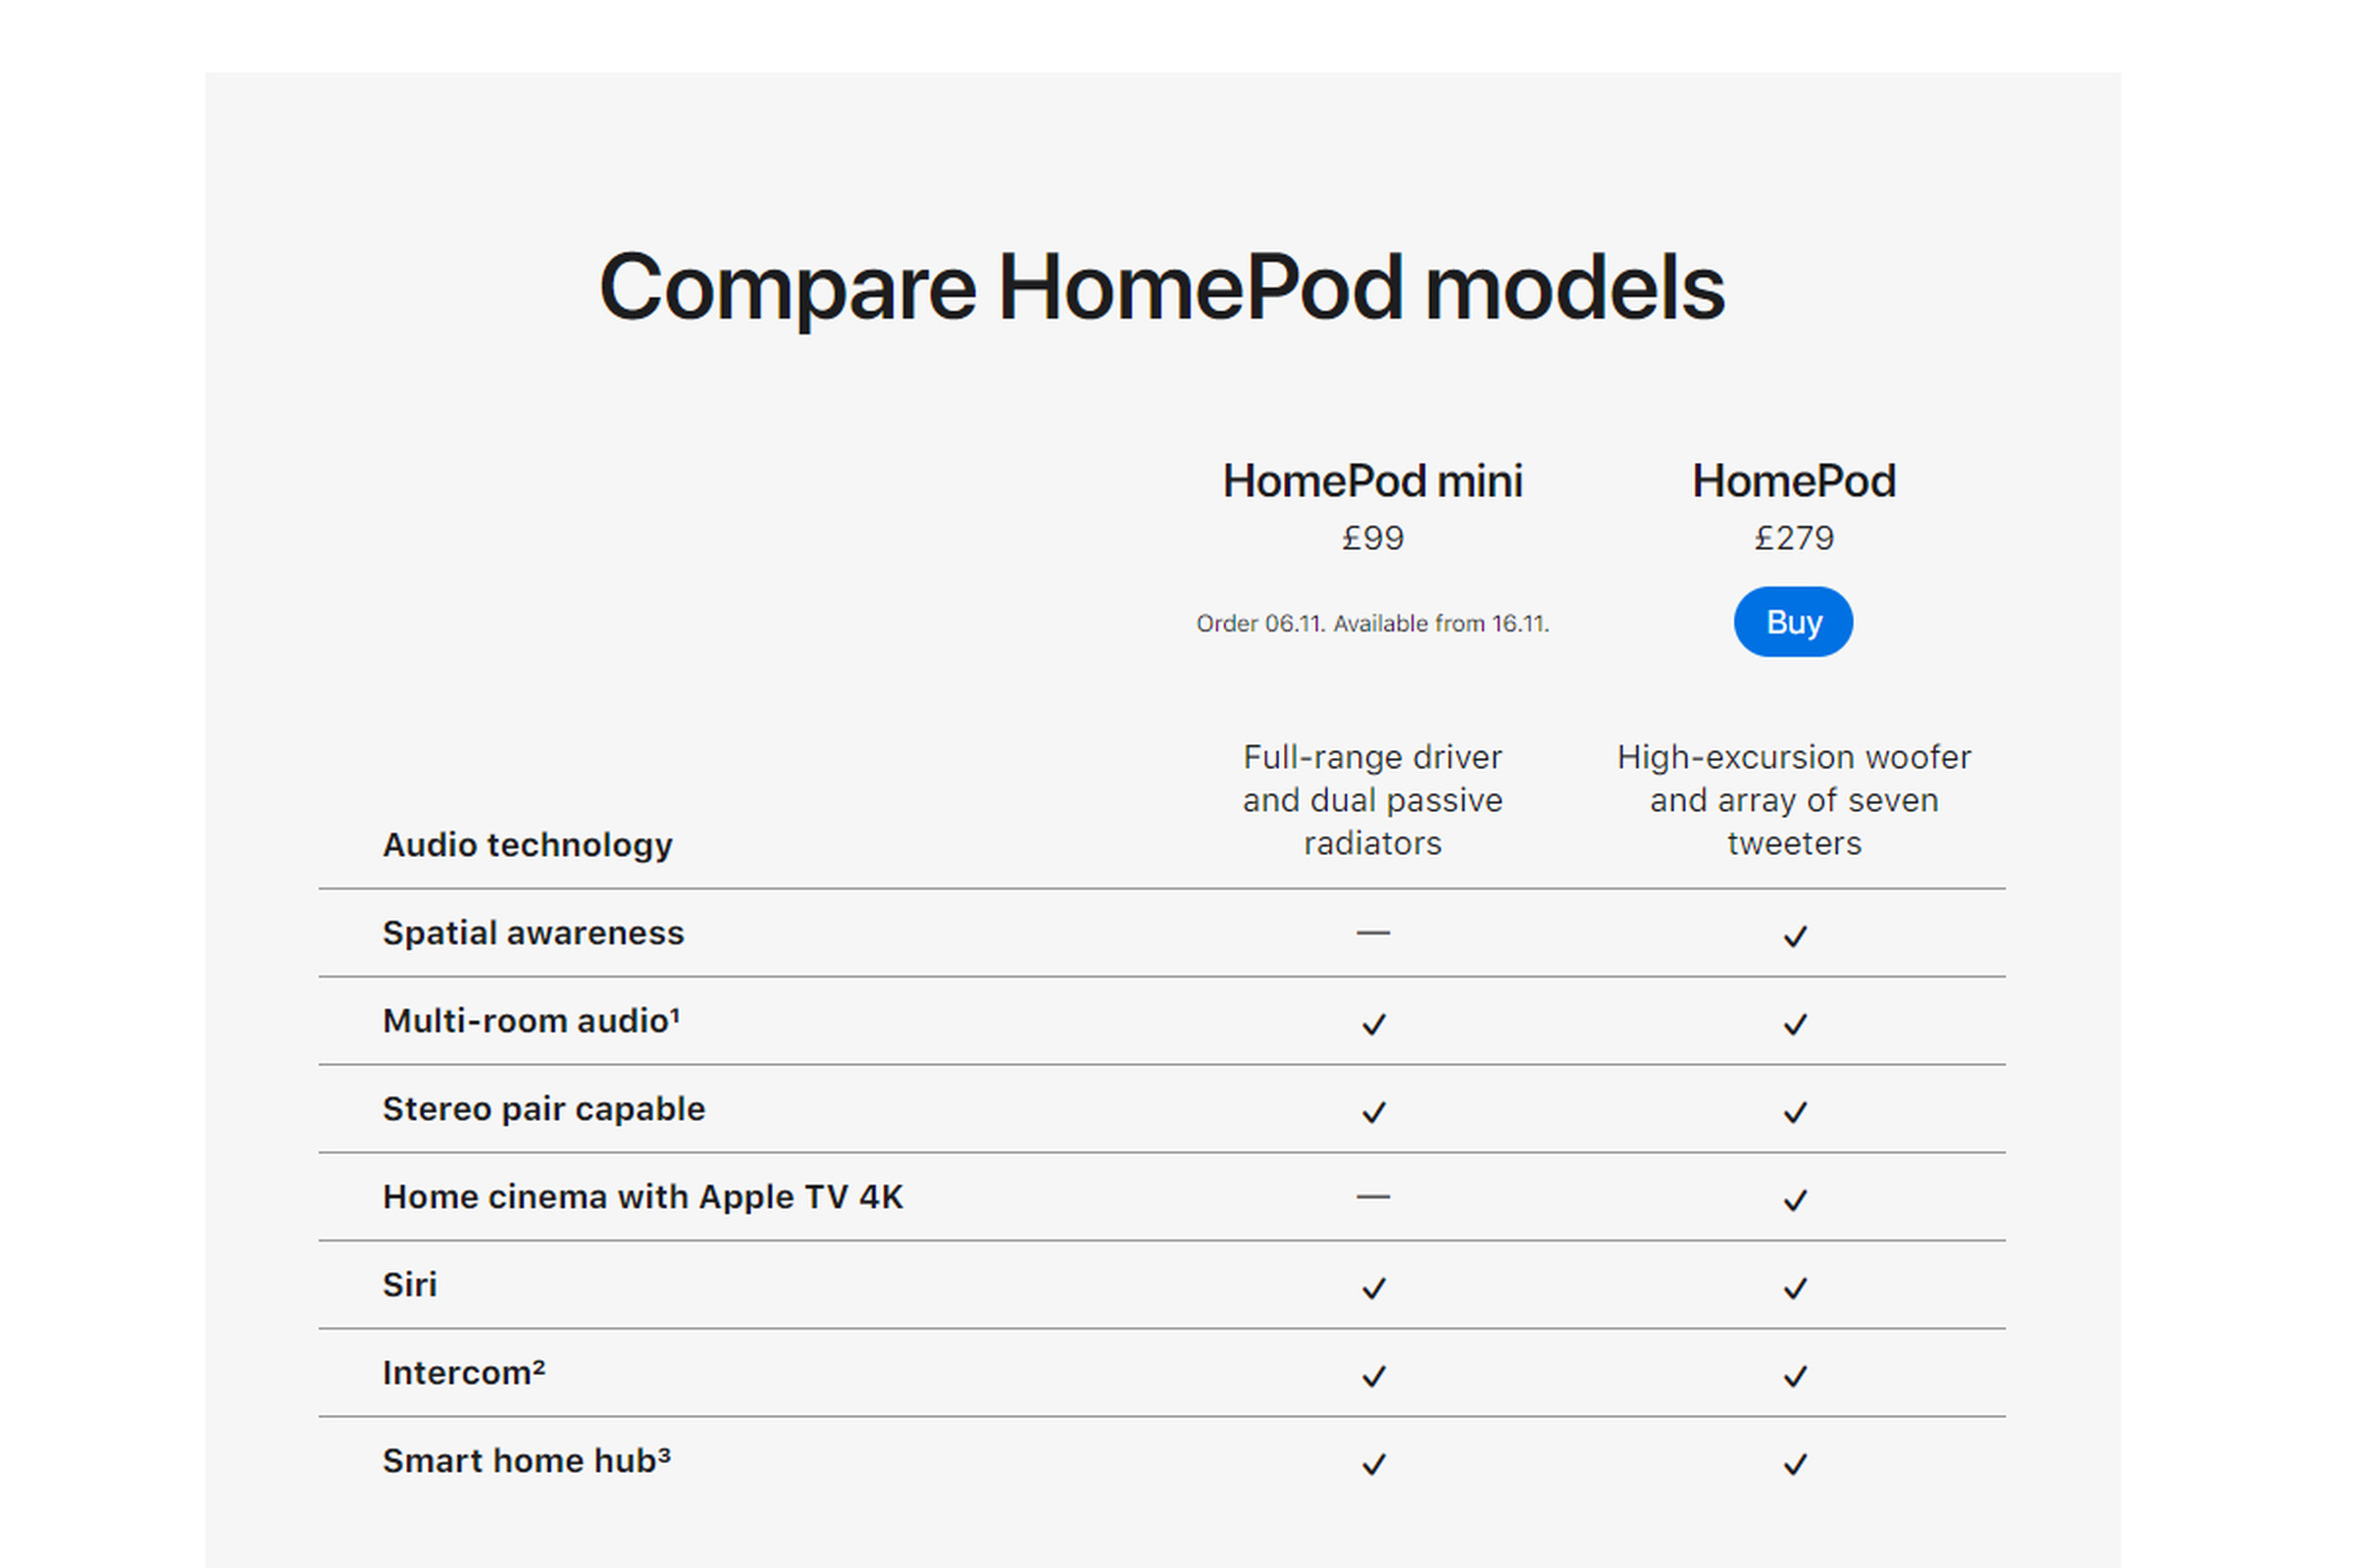 Apple’s site confirms the home cinema features are exclusive to the HomePod.